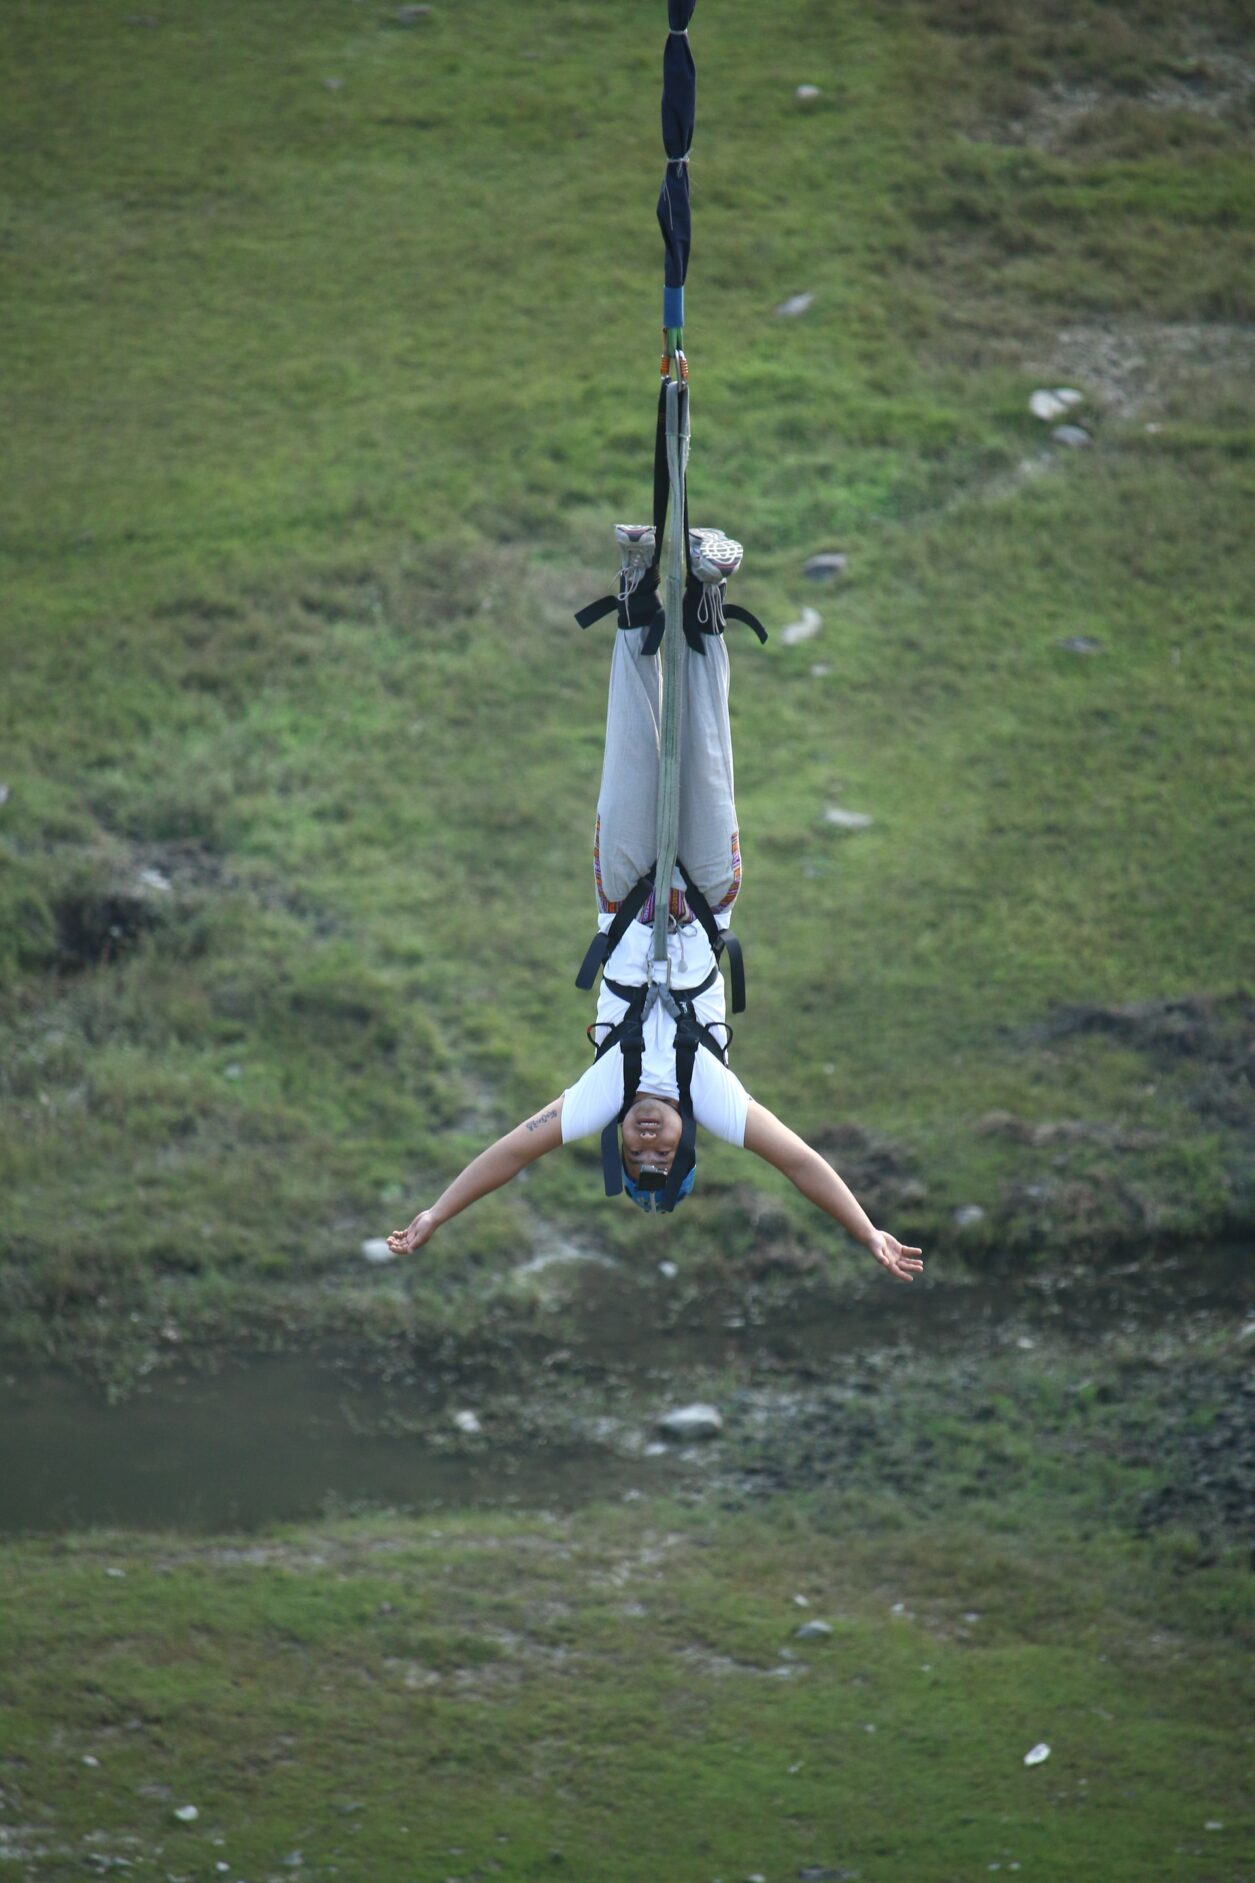 A man hanging upside down from a bungee cord